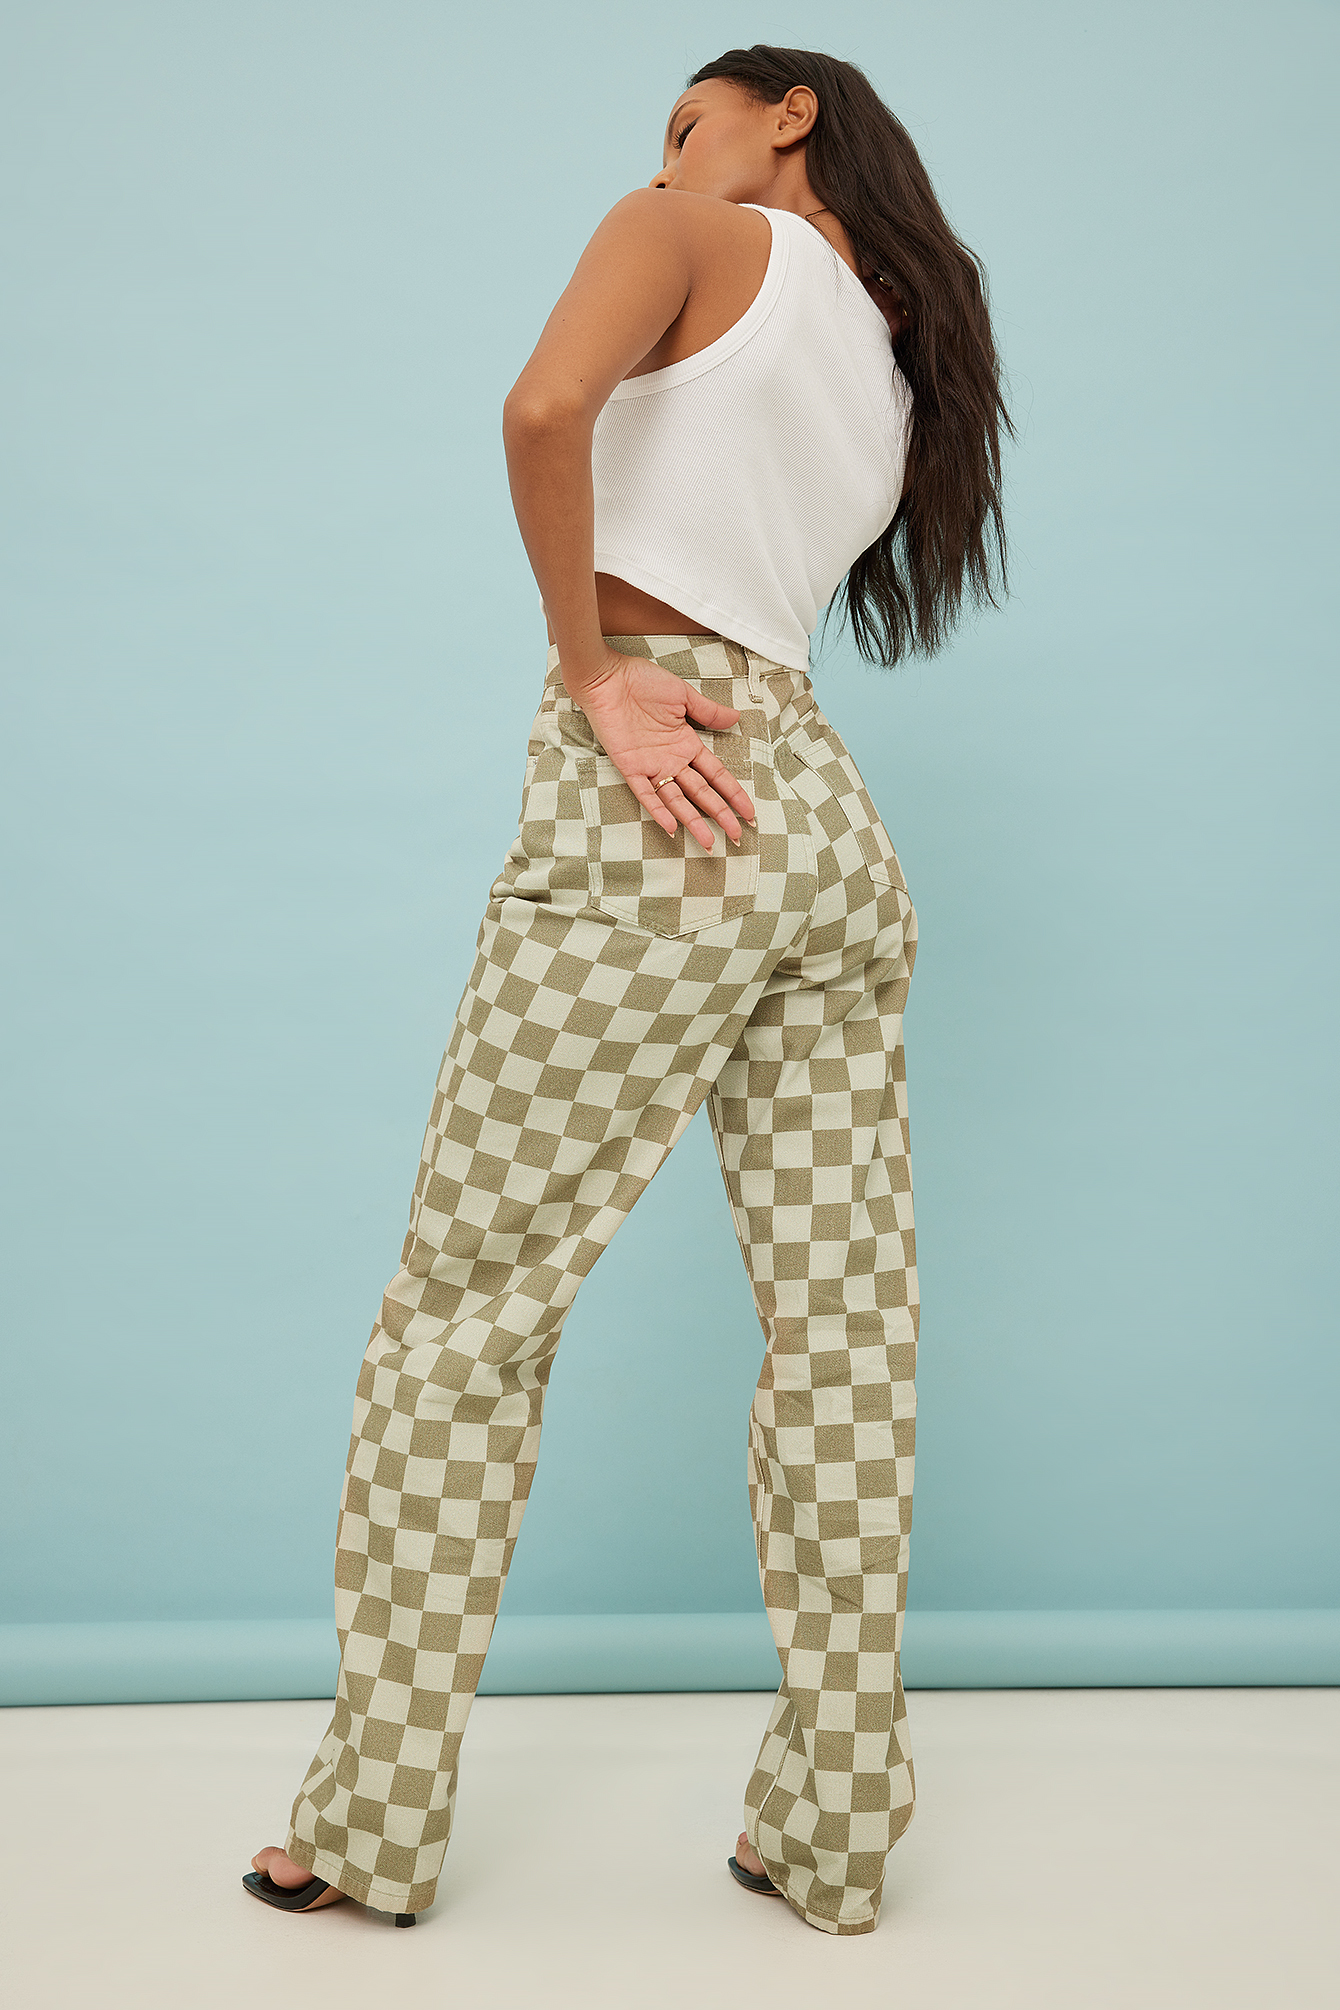 Midland Brown Checkered Jeans  Trendy pants, High jeans, Checkered